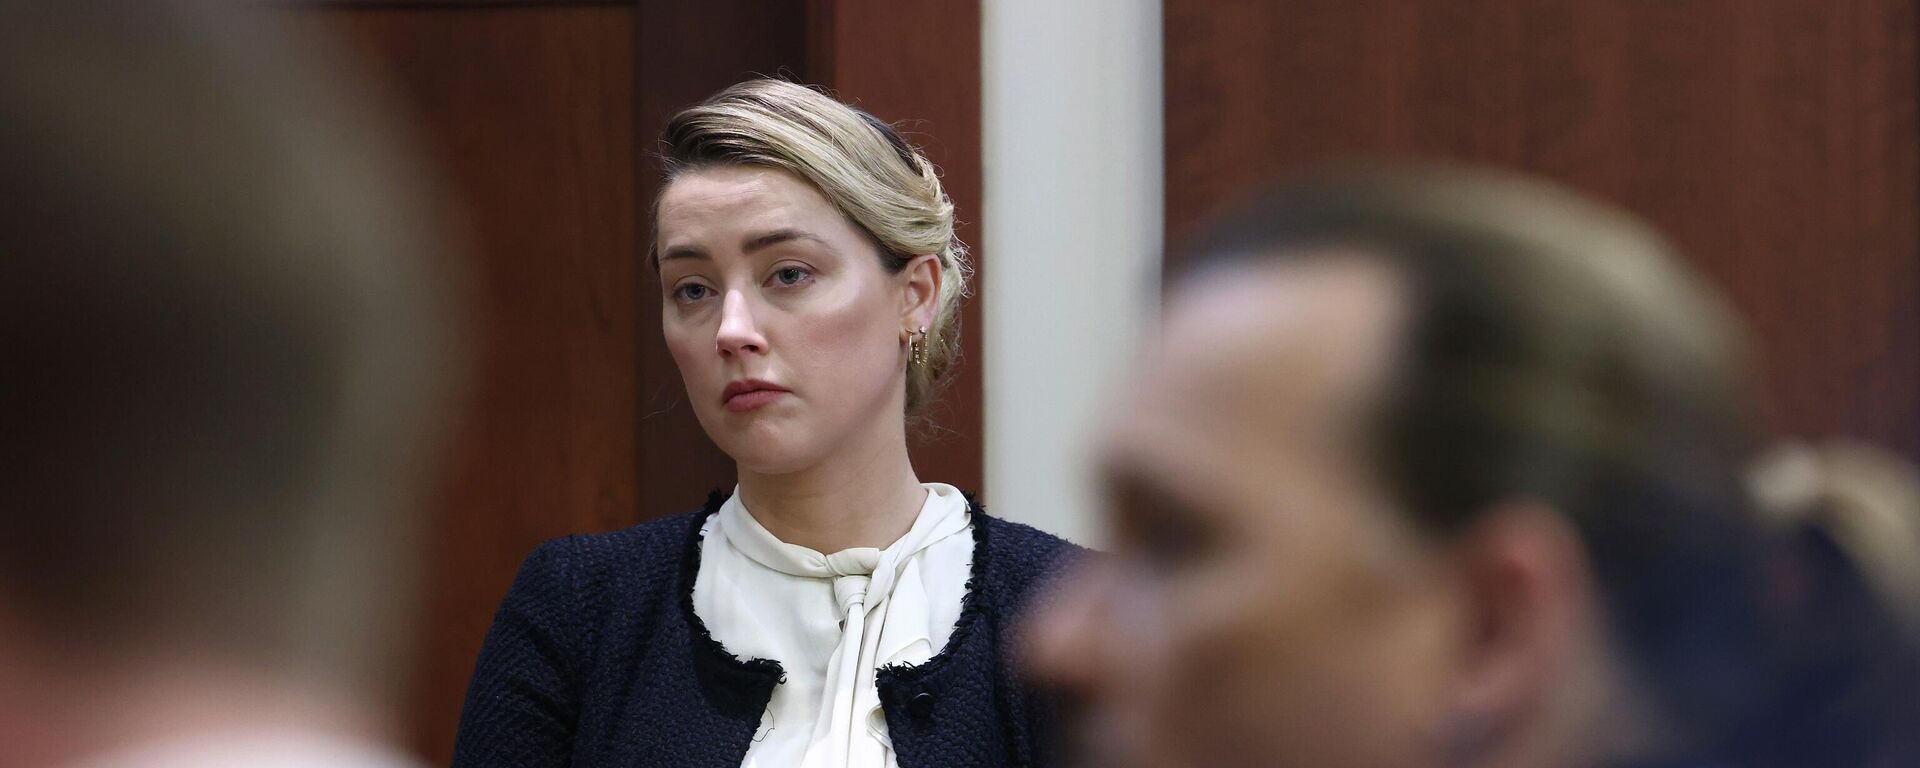 Actor Amber Heard returns after a break in the courtroom at the Fairfax County Circuit Court in Fairfax, Va., Thursday, May 5, 2022. - Sputnik International, 1920, 16.05.2022